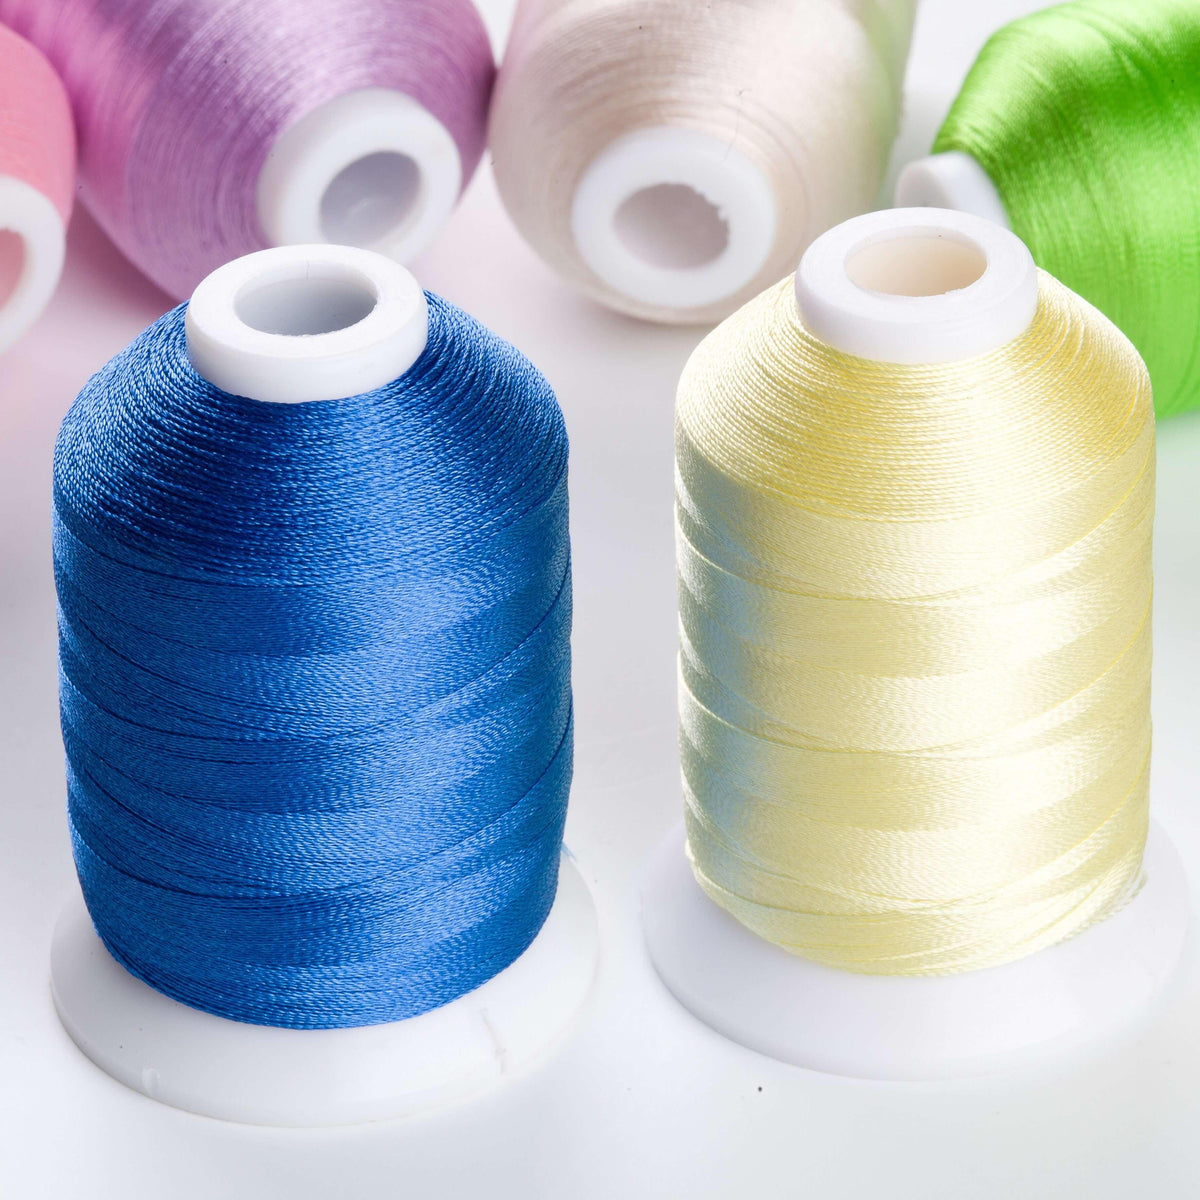 Affordable and Great Quality Embroidery Thread! - Simthread Review 